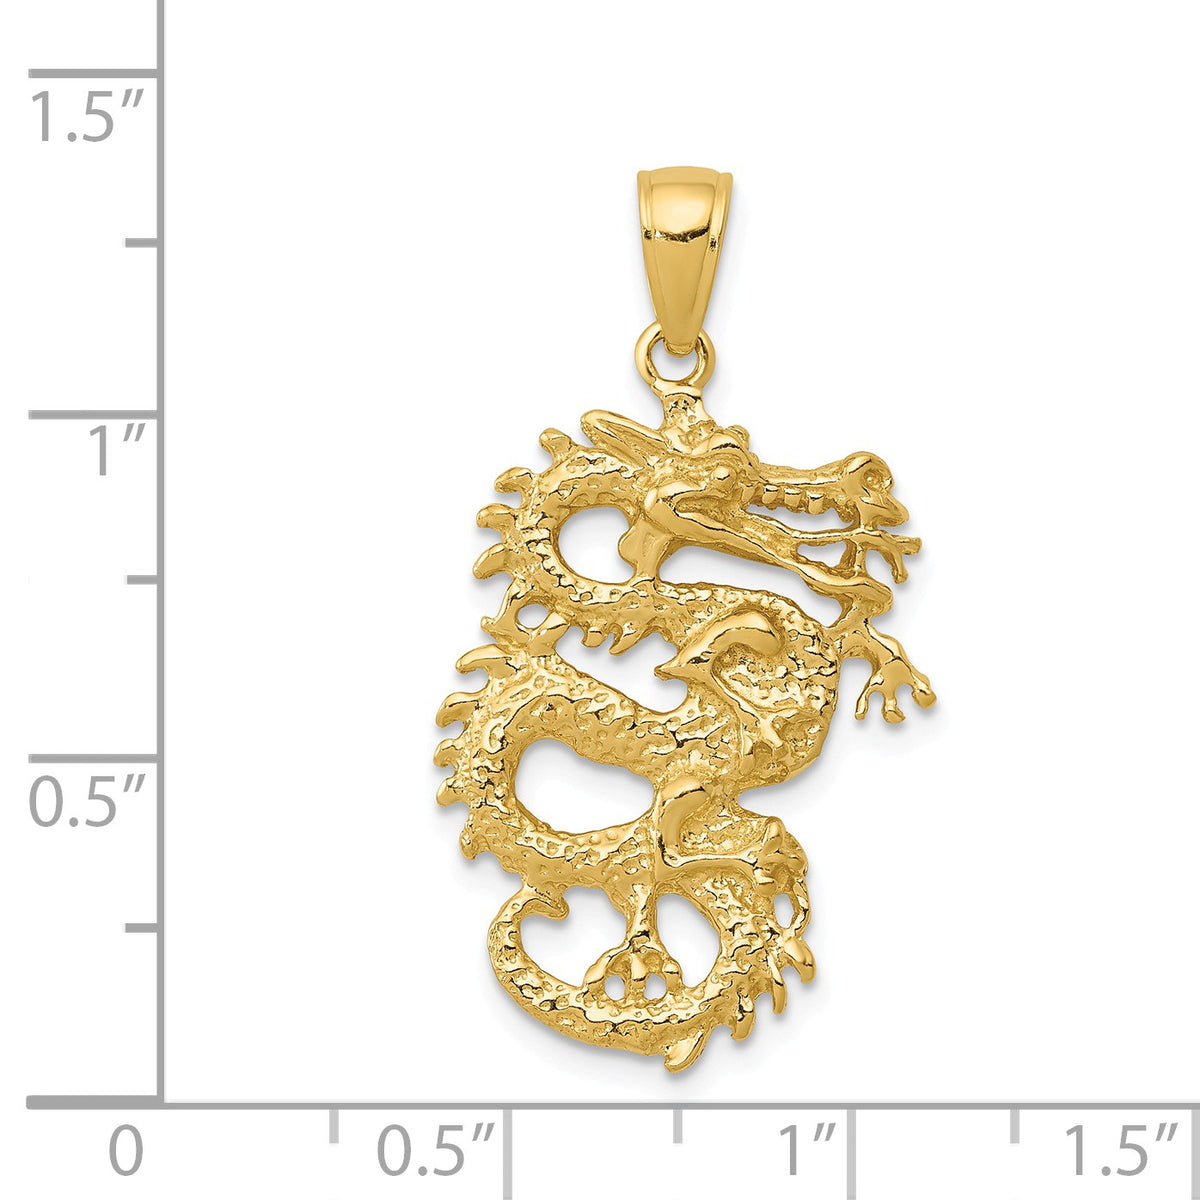 Alternate view of the 14k Yellow Gold 3D Serpentine Dragon Pendant by The Black Bow Jewelry Co.